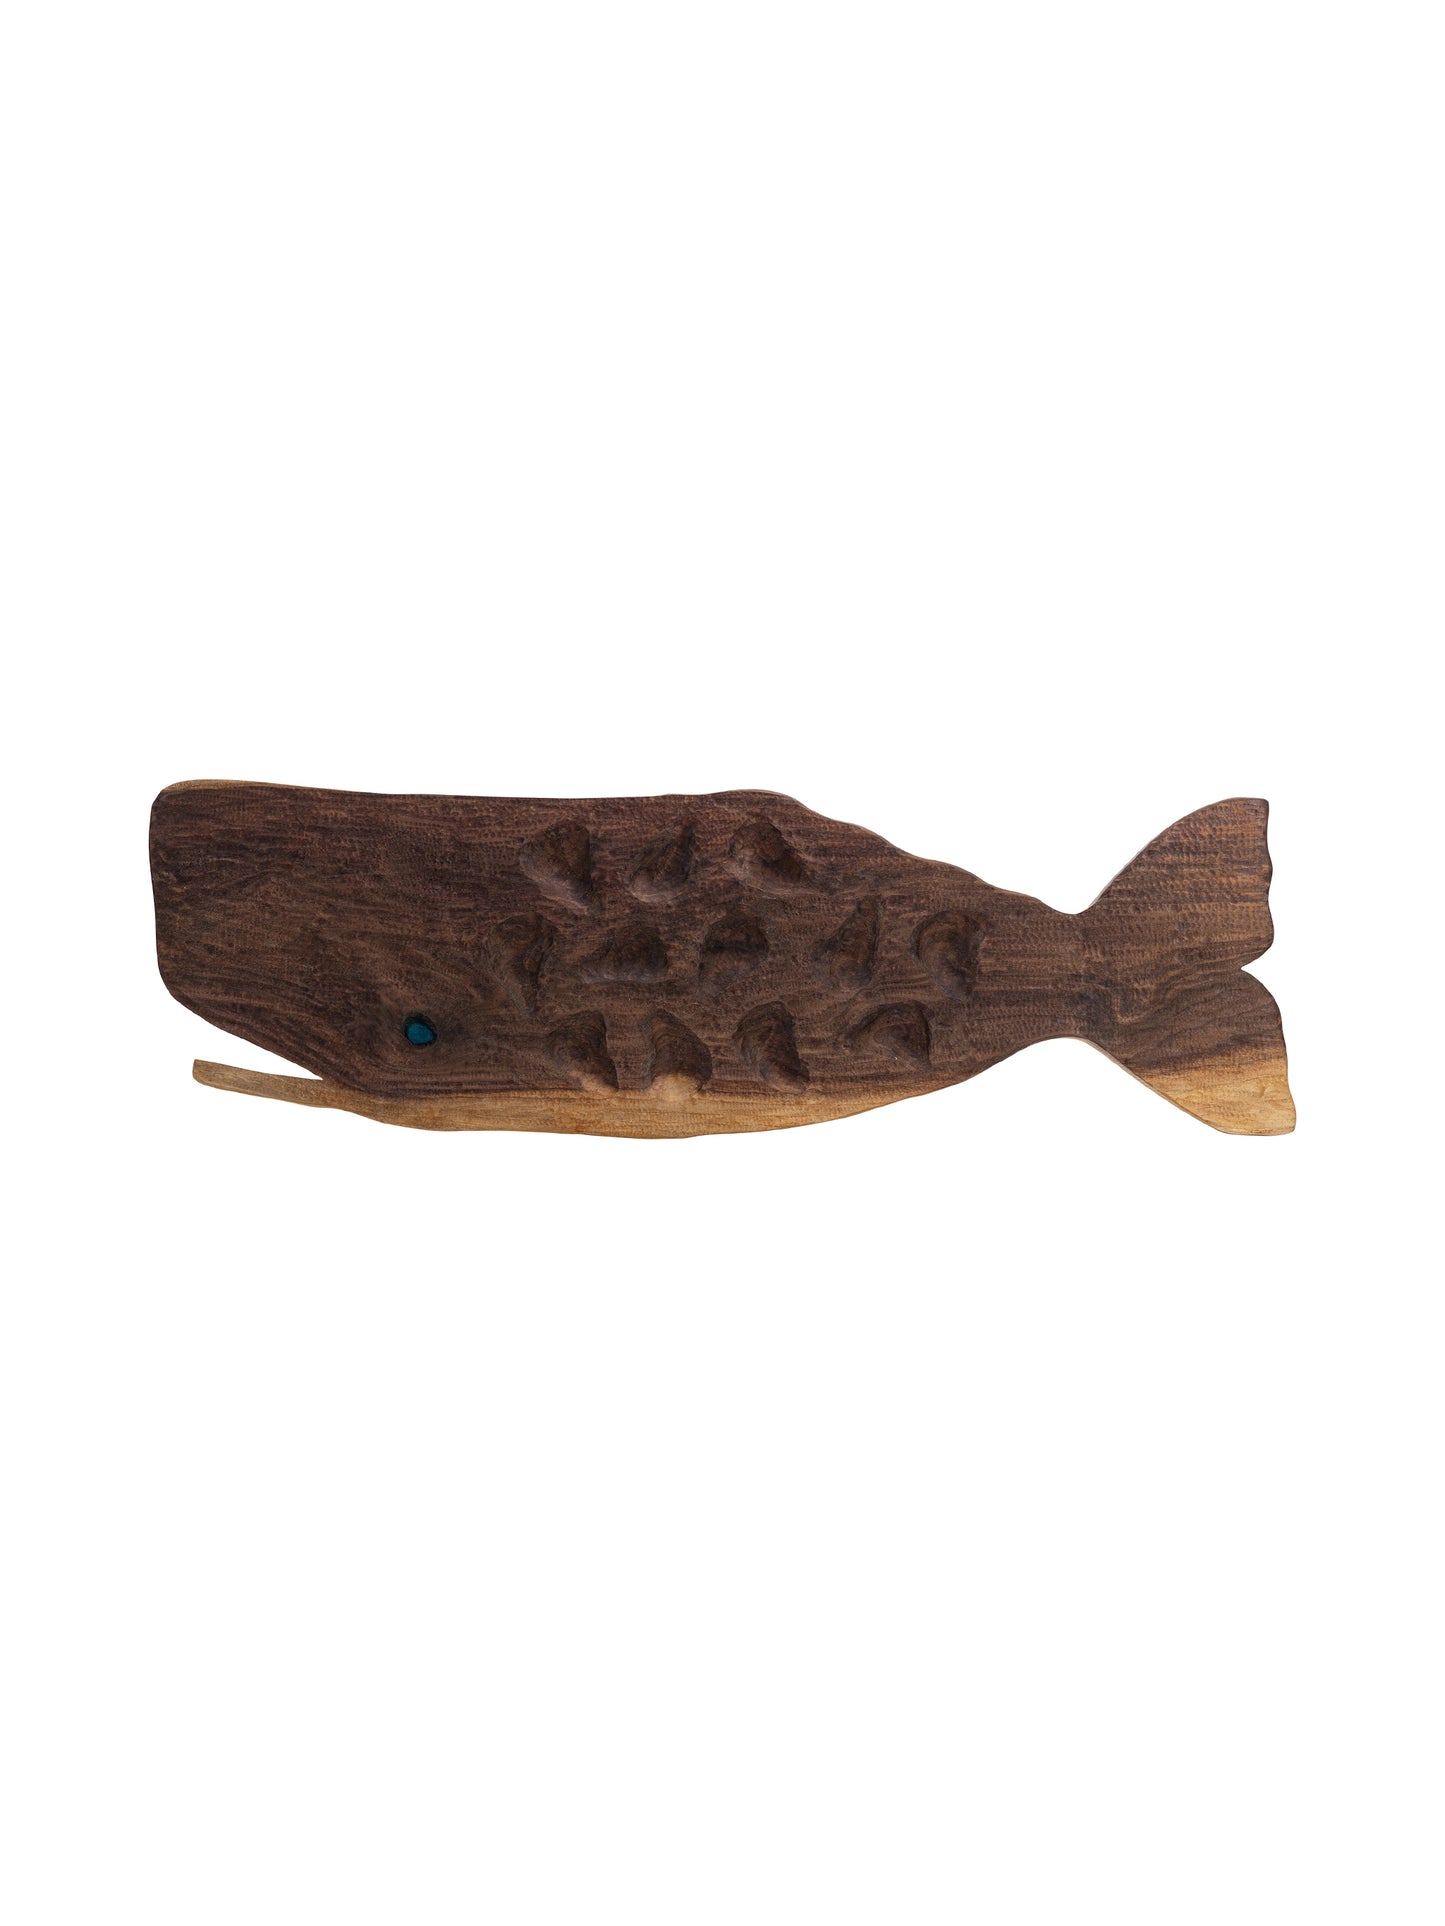 Nantucket Whale Oyster Serving Board Five Weston Table